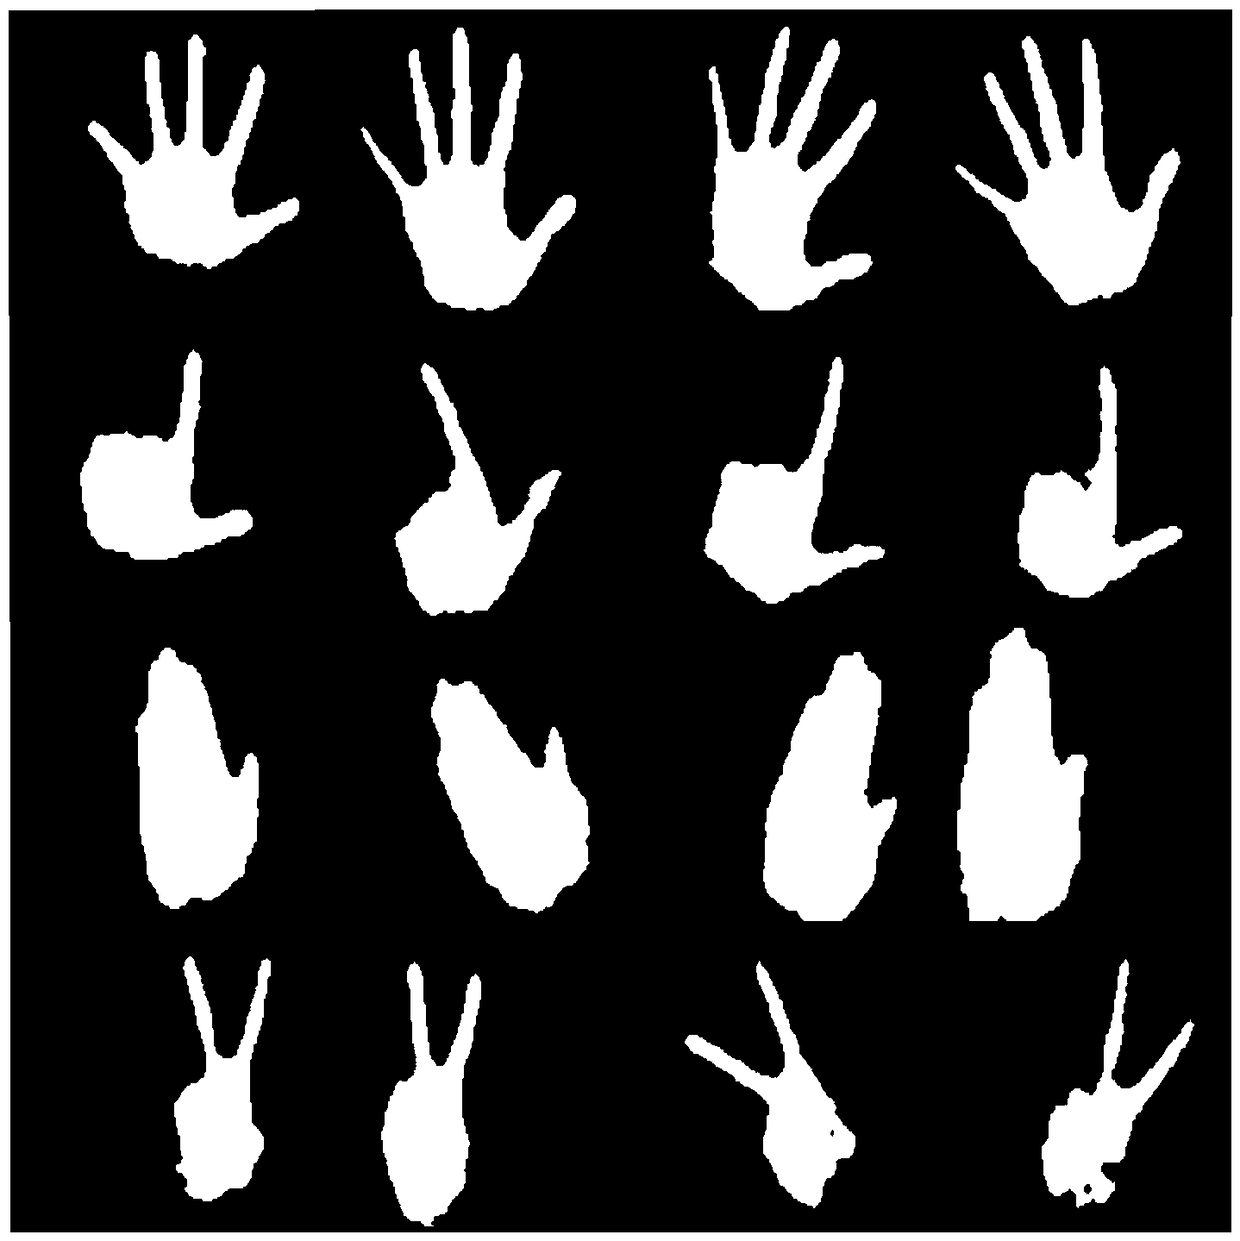 A method and apparatus for recognizing static gestures